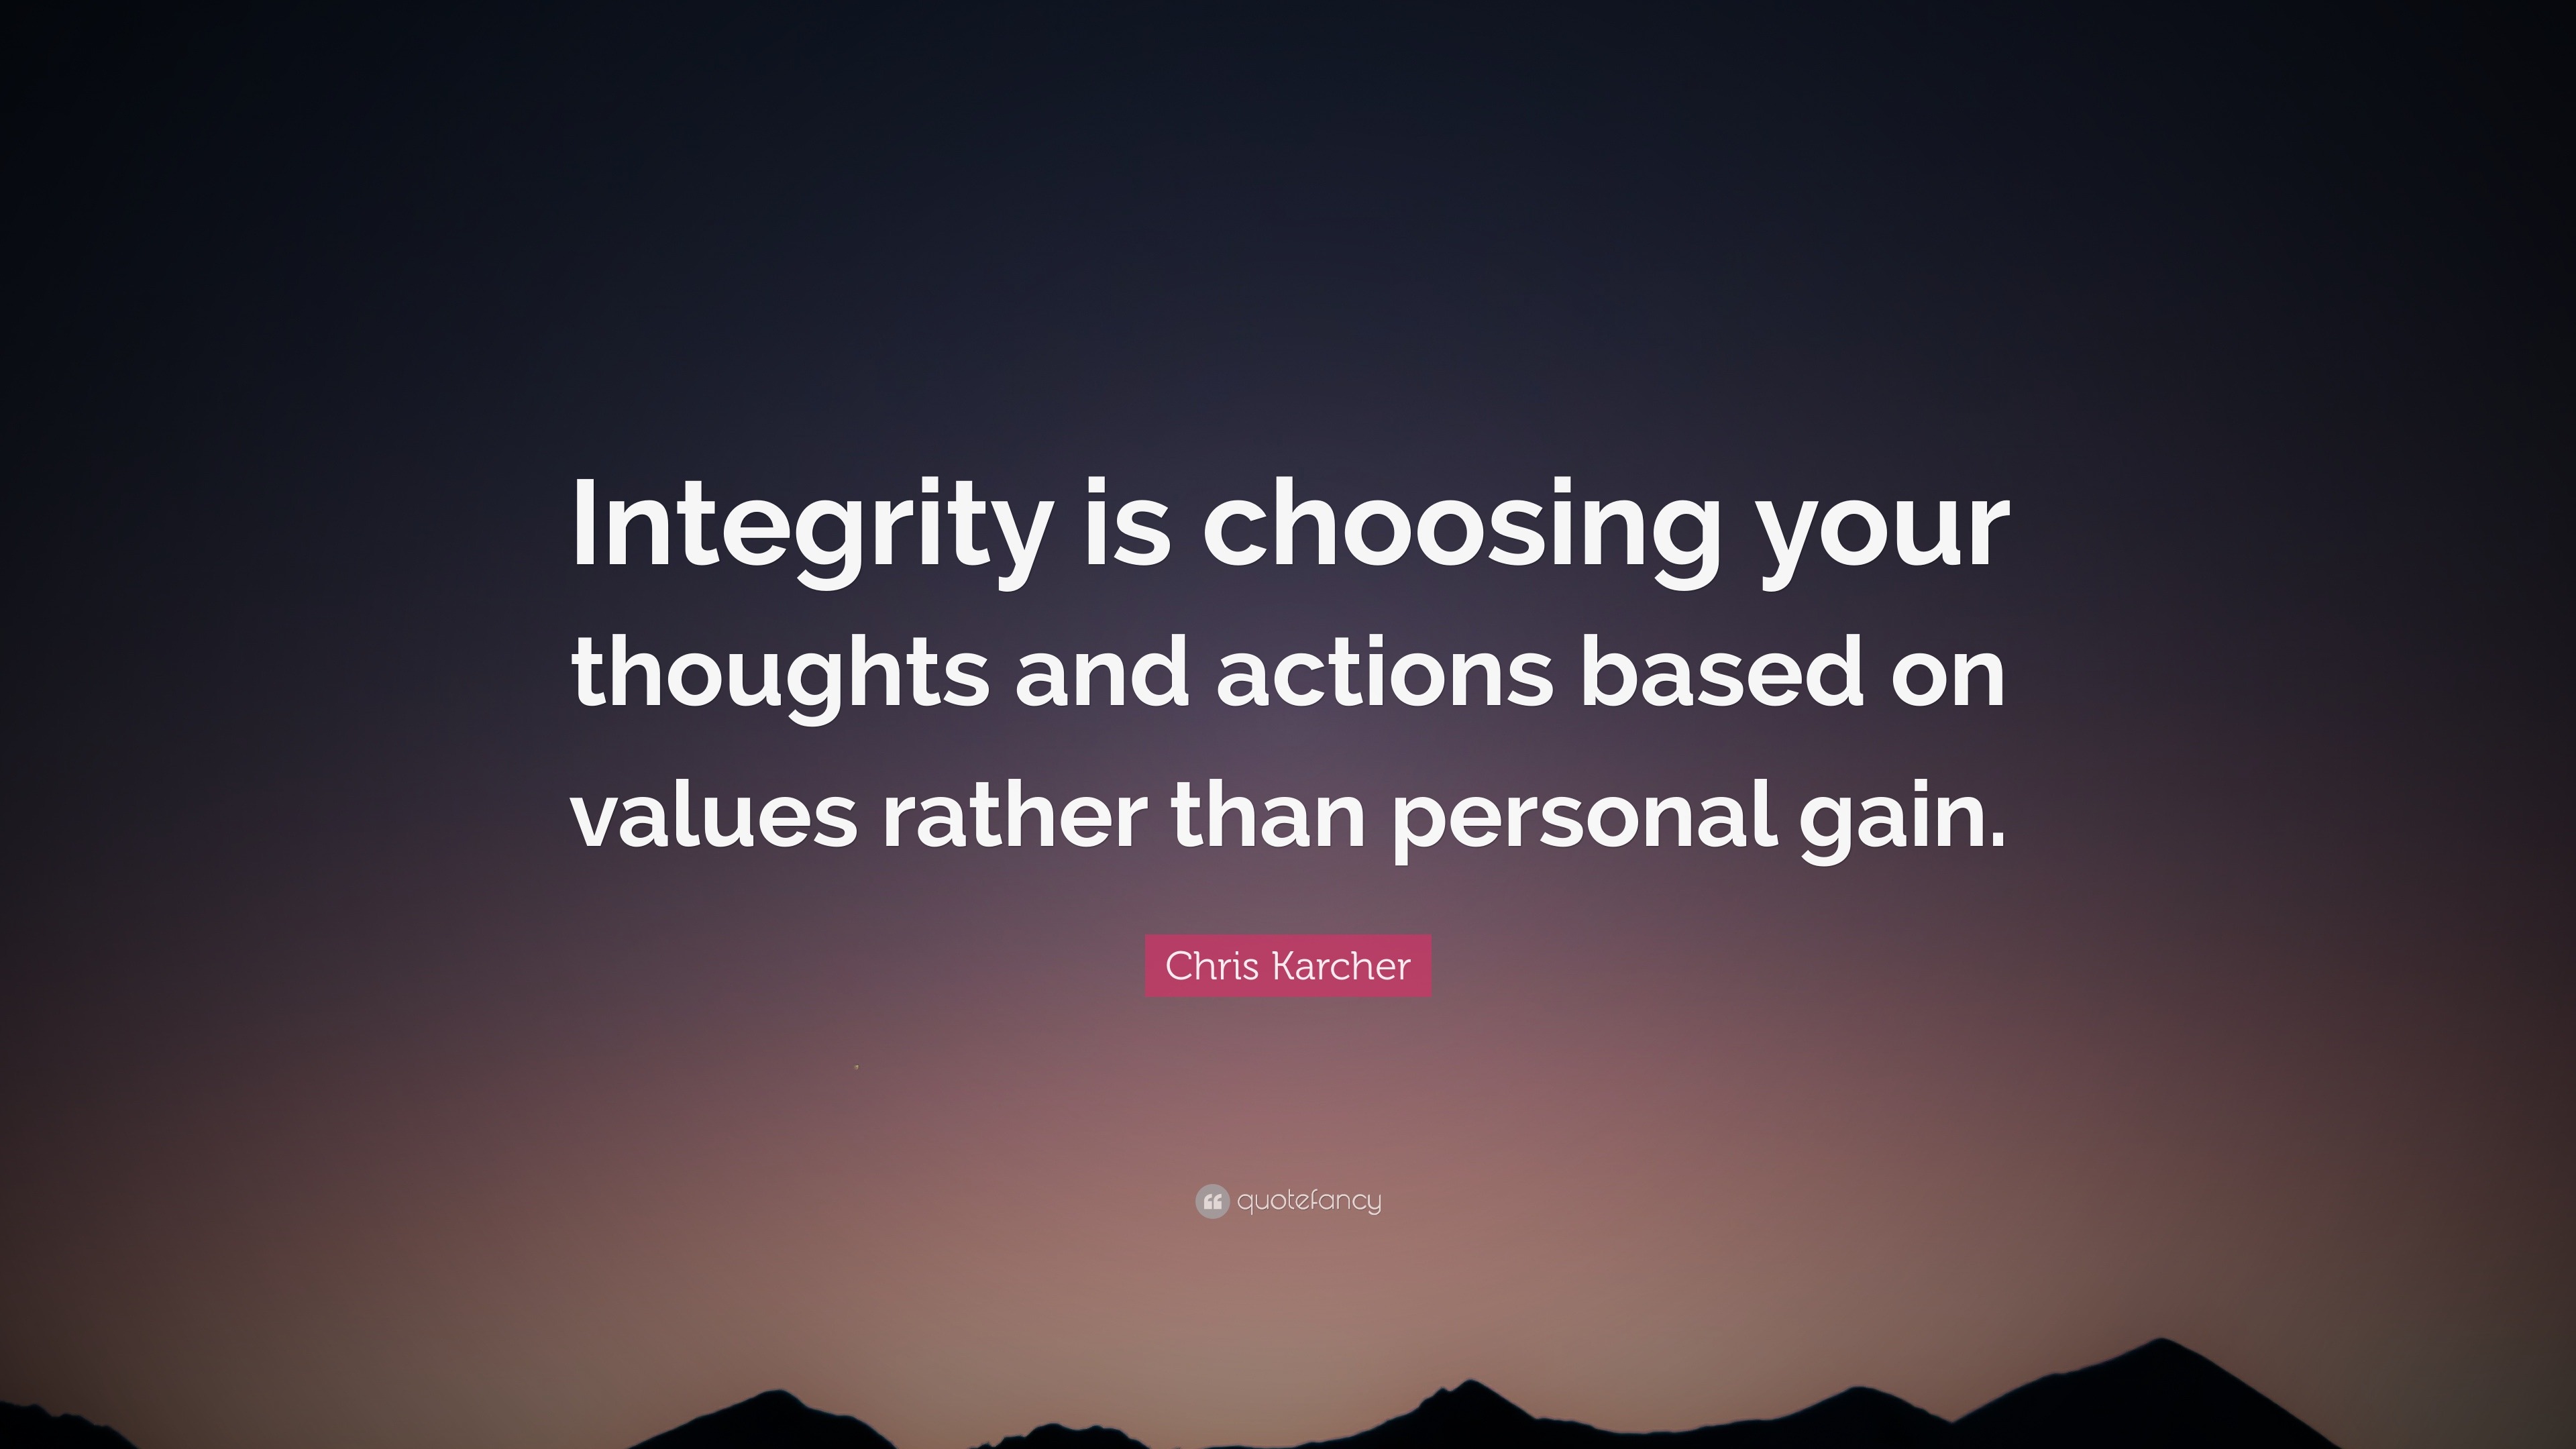 Chris Karcher Quote: “Integrity is choosing your thoughts and actions